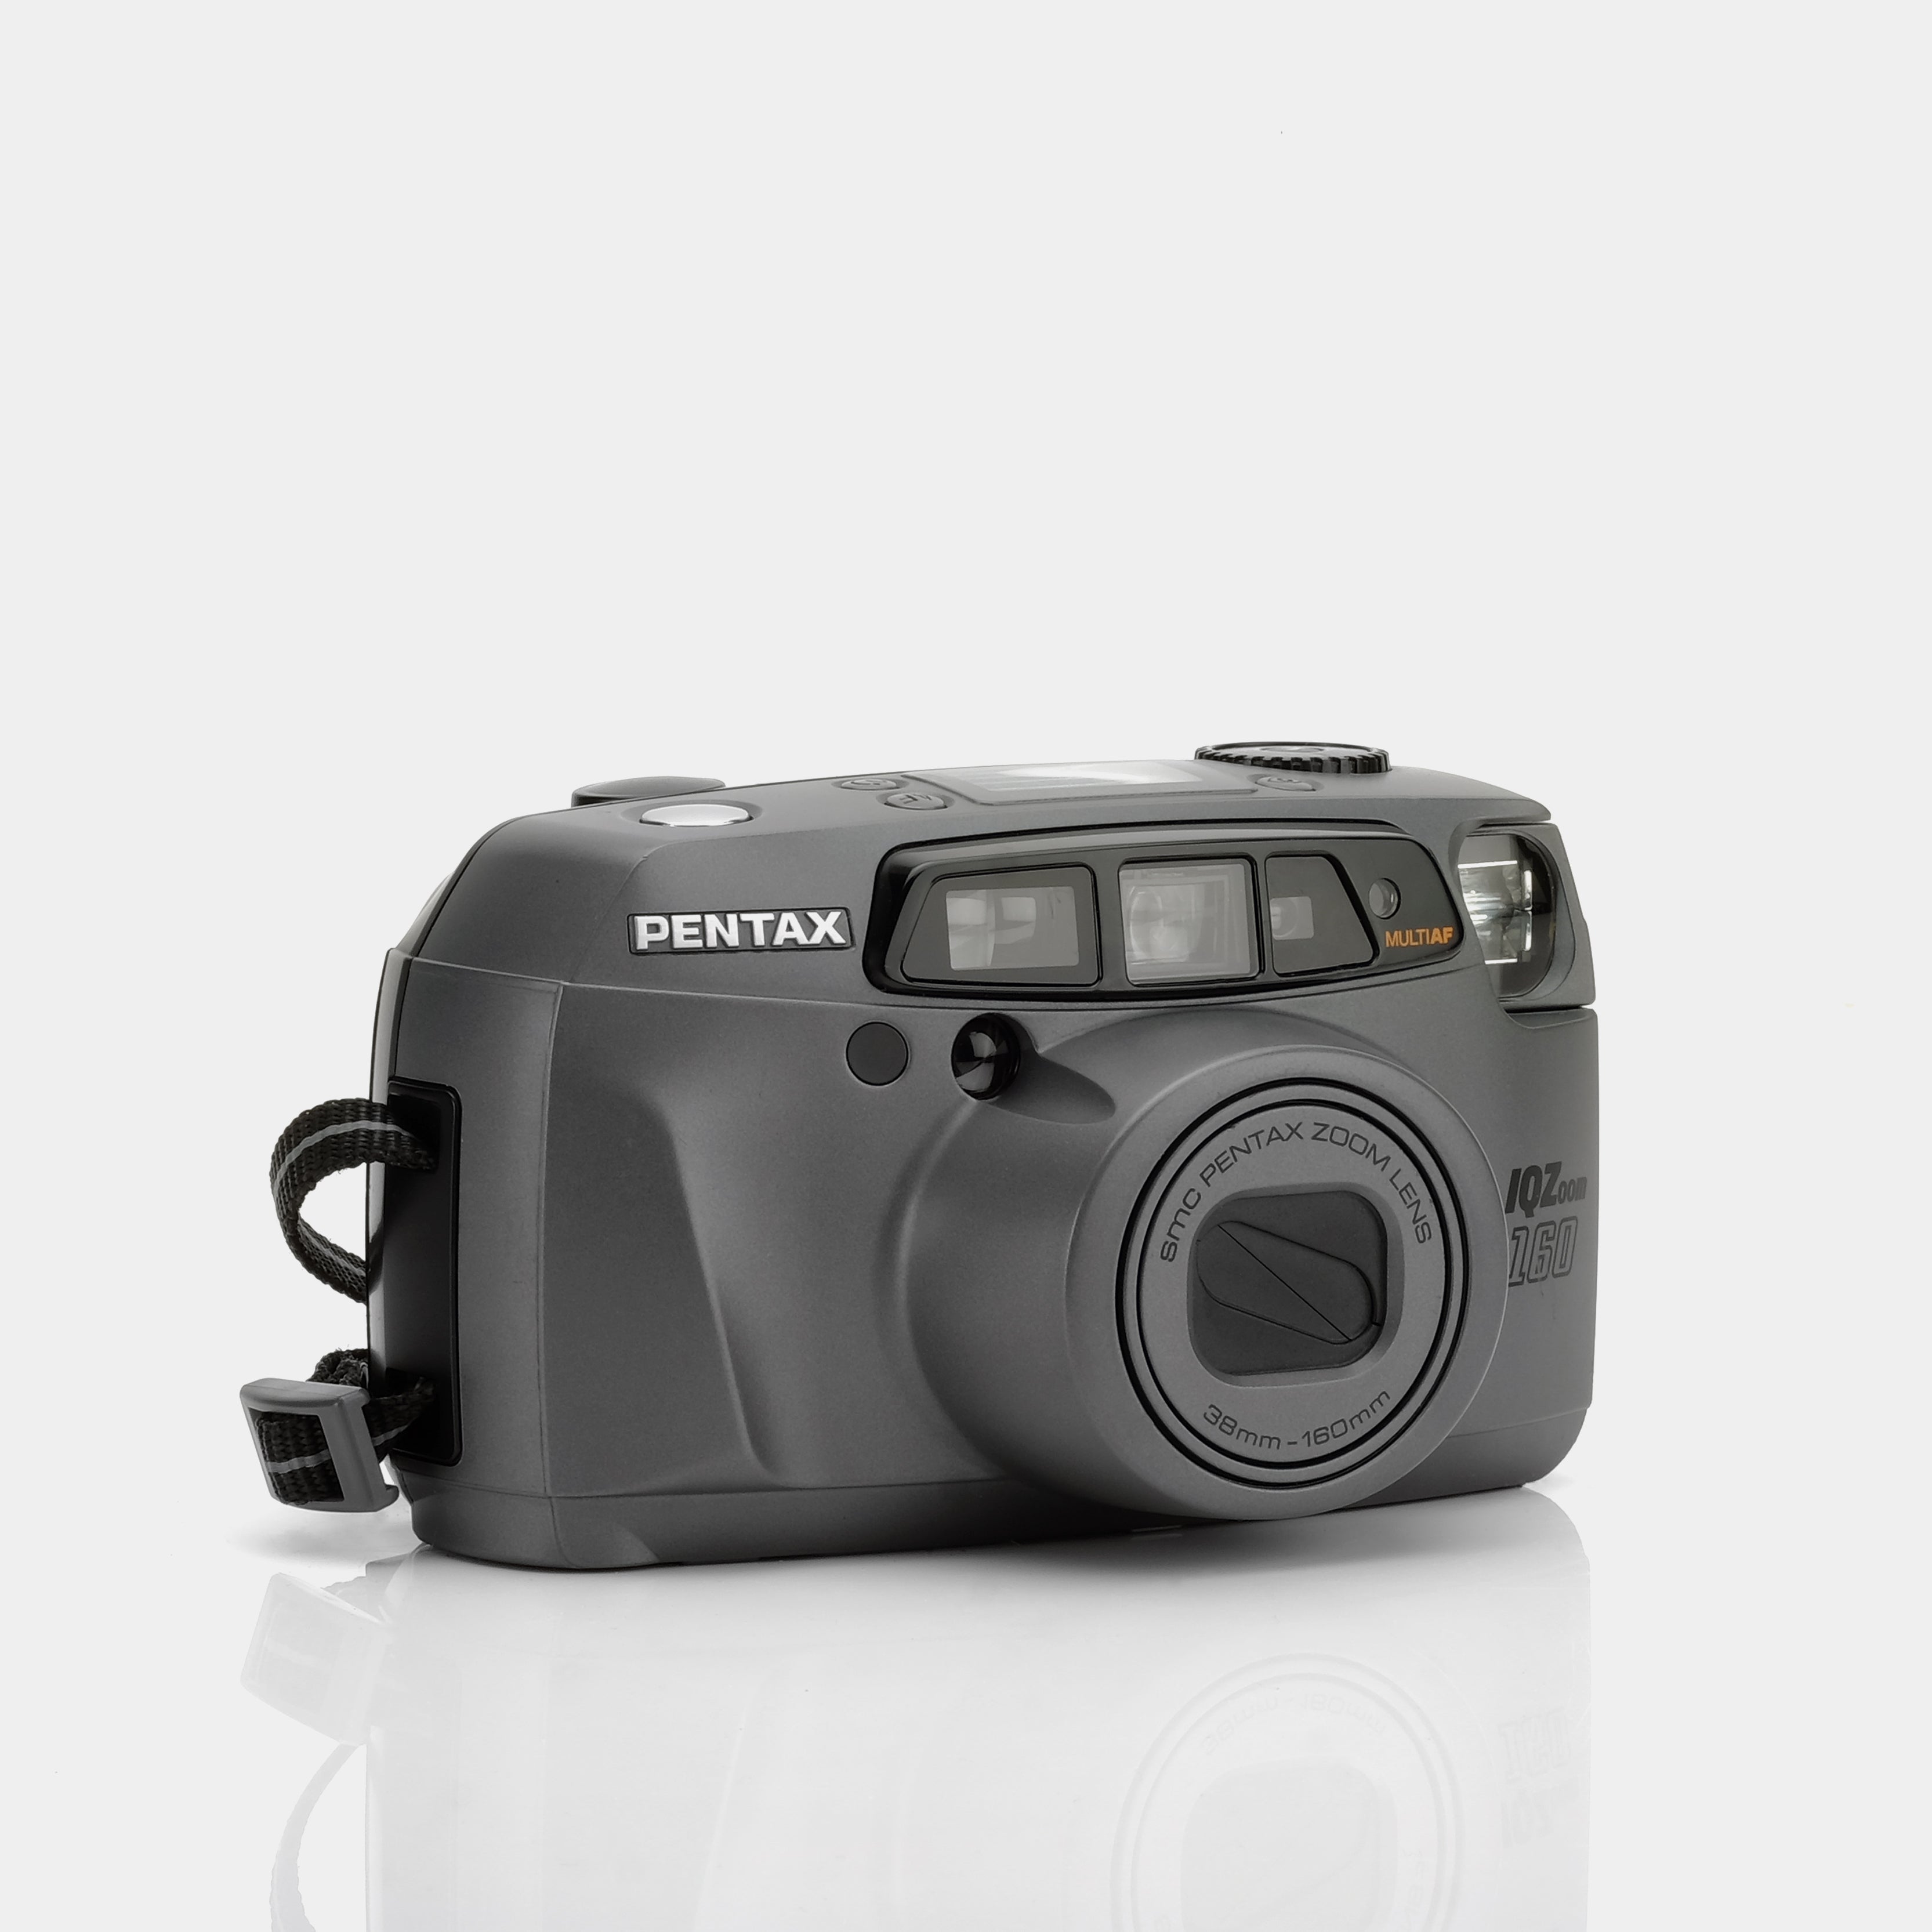 Pentax IQZoom 160 35mm Point and Shoot Film Camera